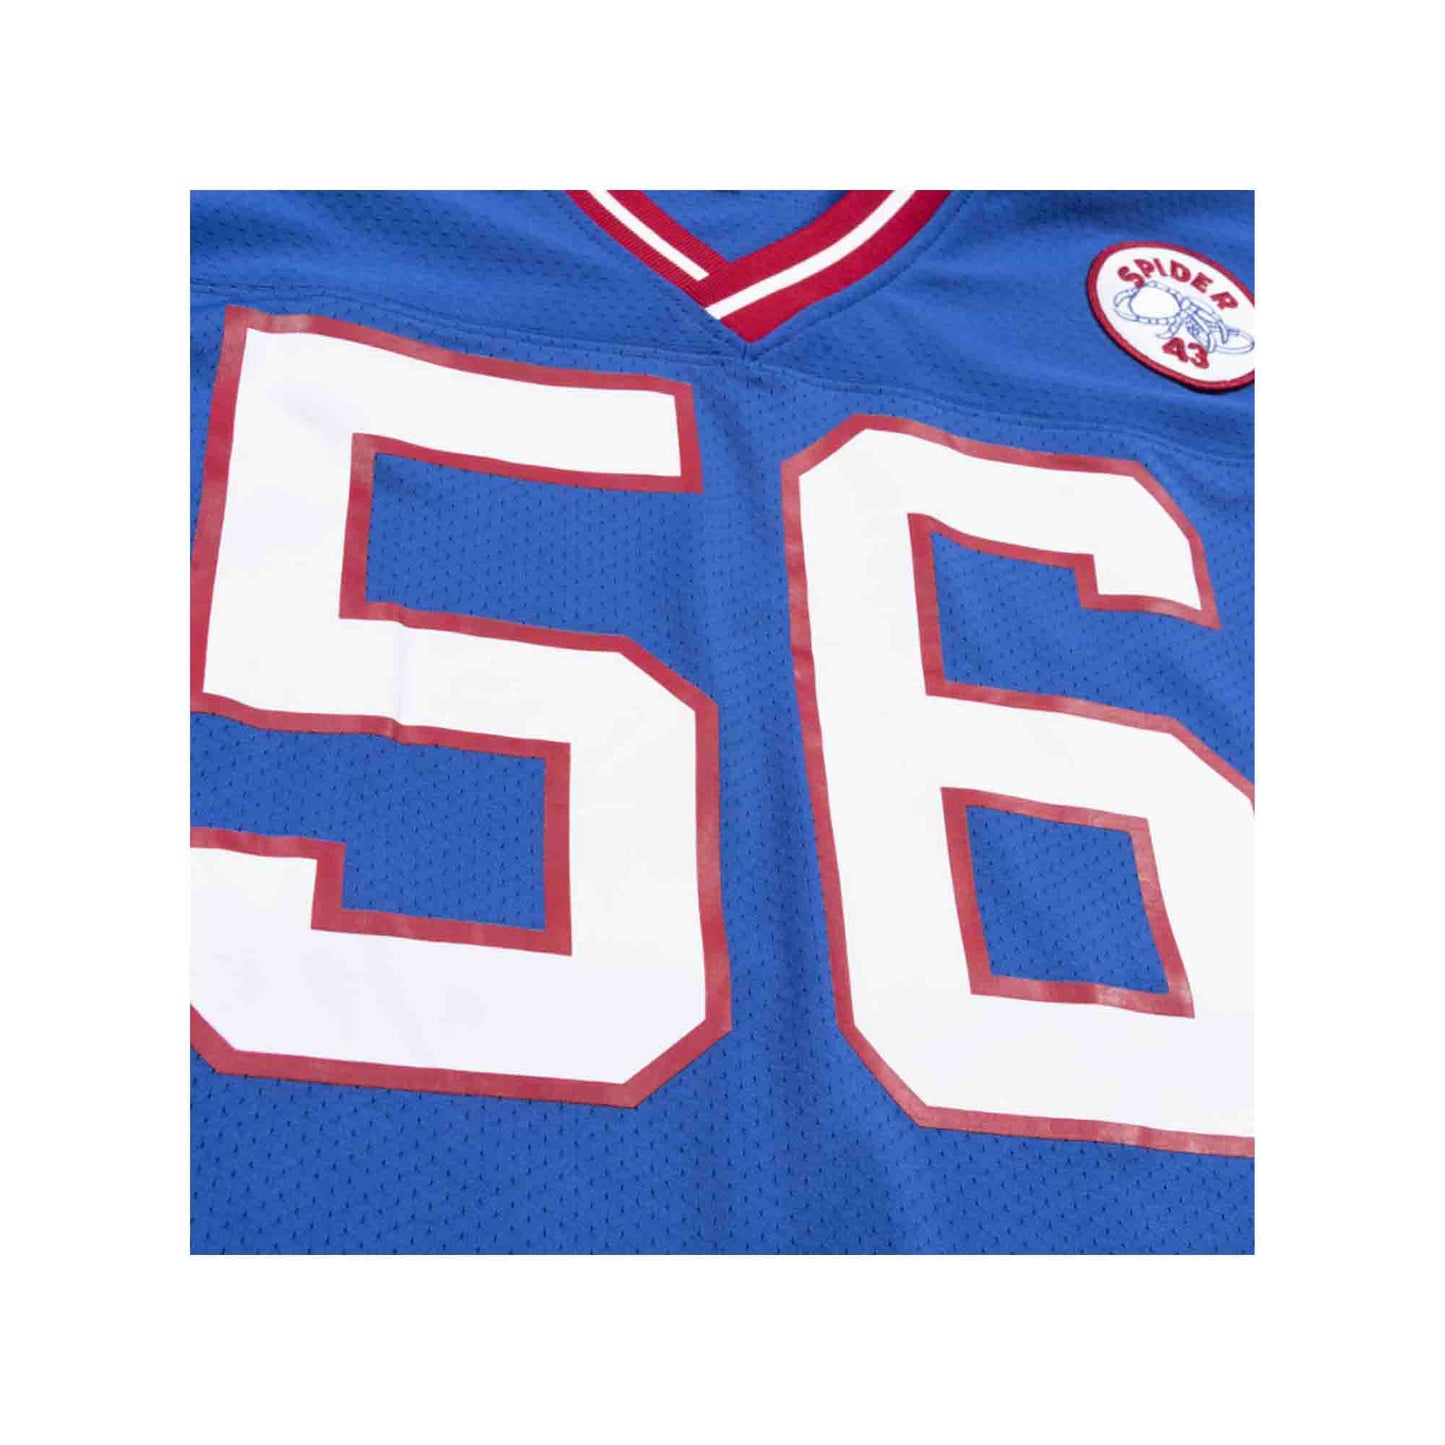 Authentic Lawrence Taylor New York Giants Jersey - Shop Mitchell